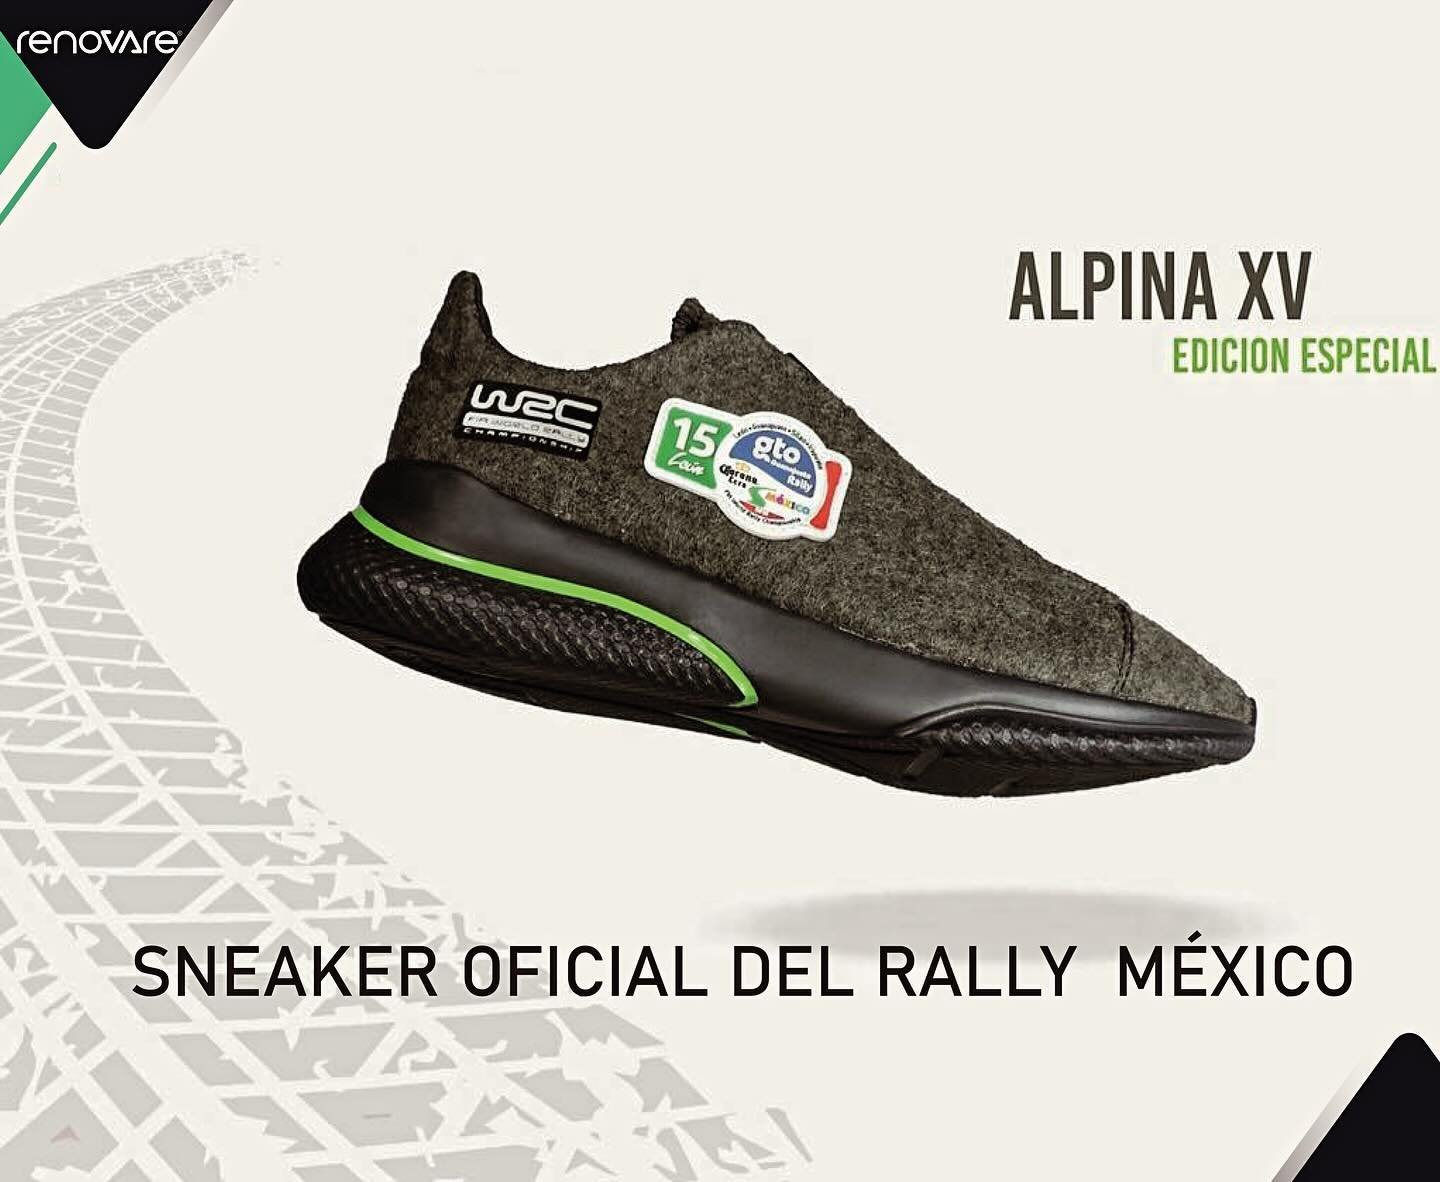 Hey #FIA shall we make you another upcycled sustainable shoe? The special edition rally shoe we made was fun but we&rsquo;re ready for #F1! Good luck to all drivers in #f1miami today! #formula1 #f1miami #f1miami #formulaone #sustainable #sustainablef